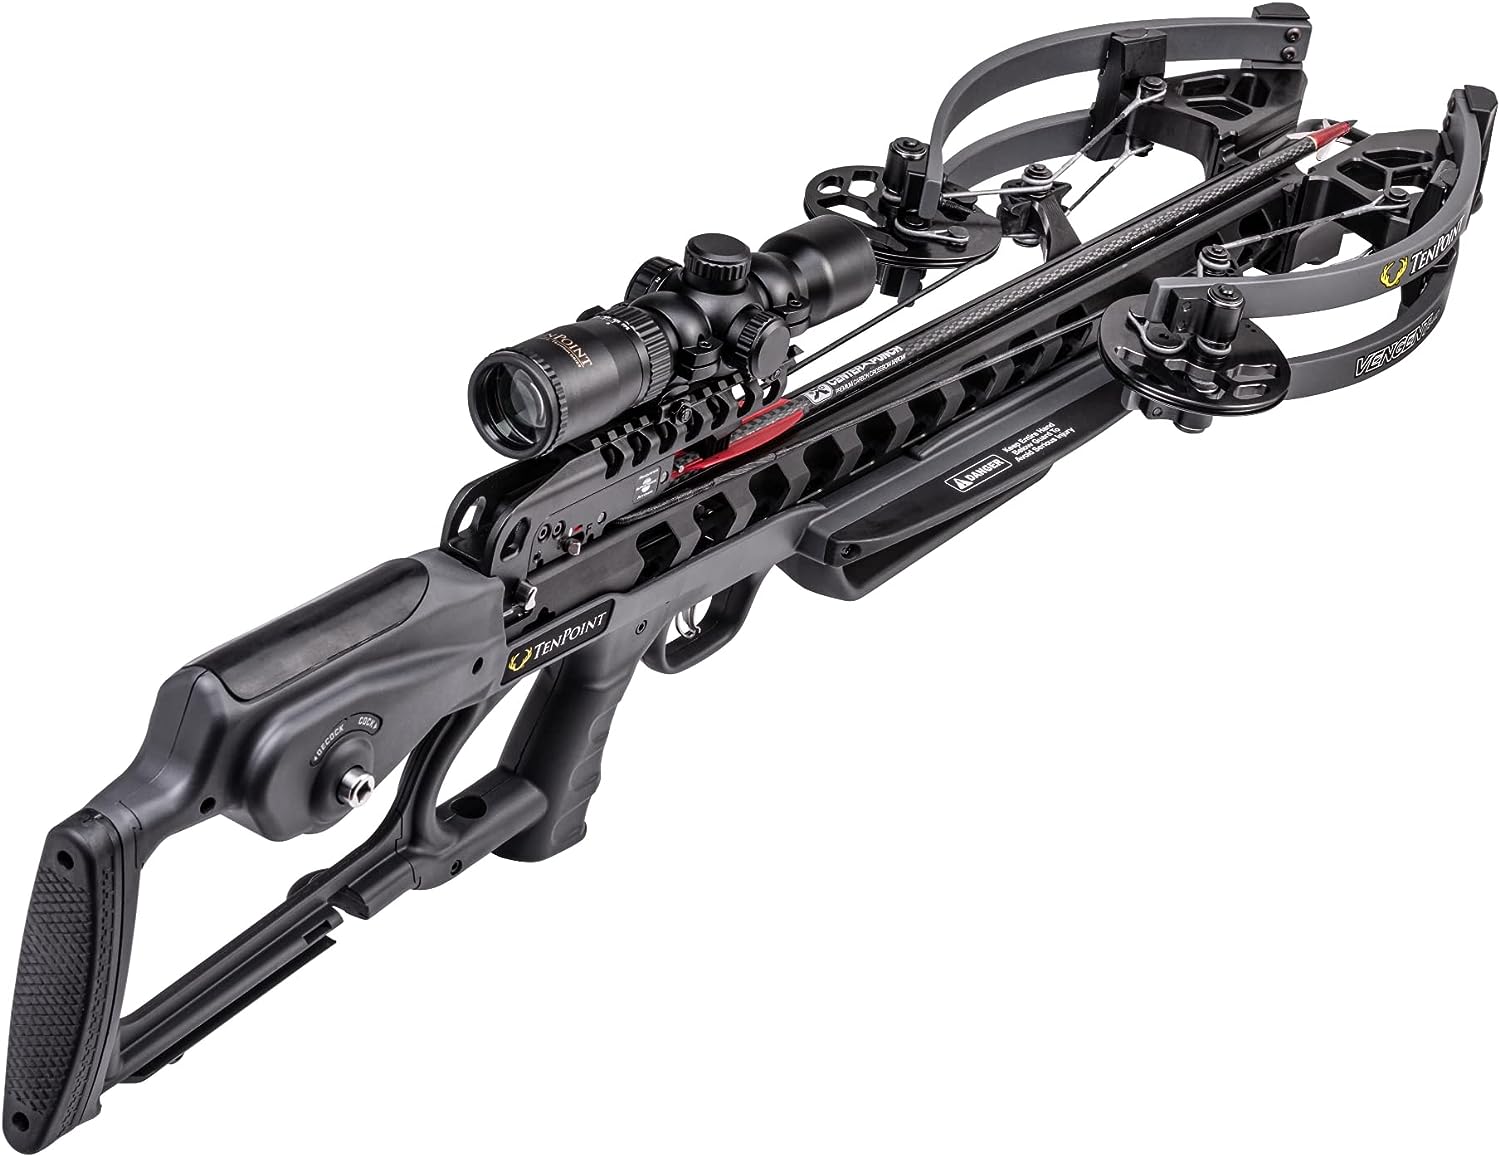 TenPoint Vengent S440 Hunting Crossbow Package with ACUslide and RangeMaster Scope